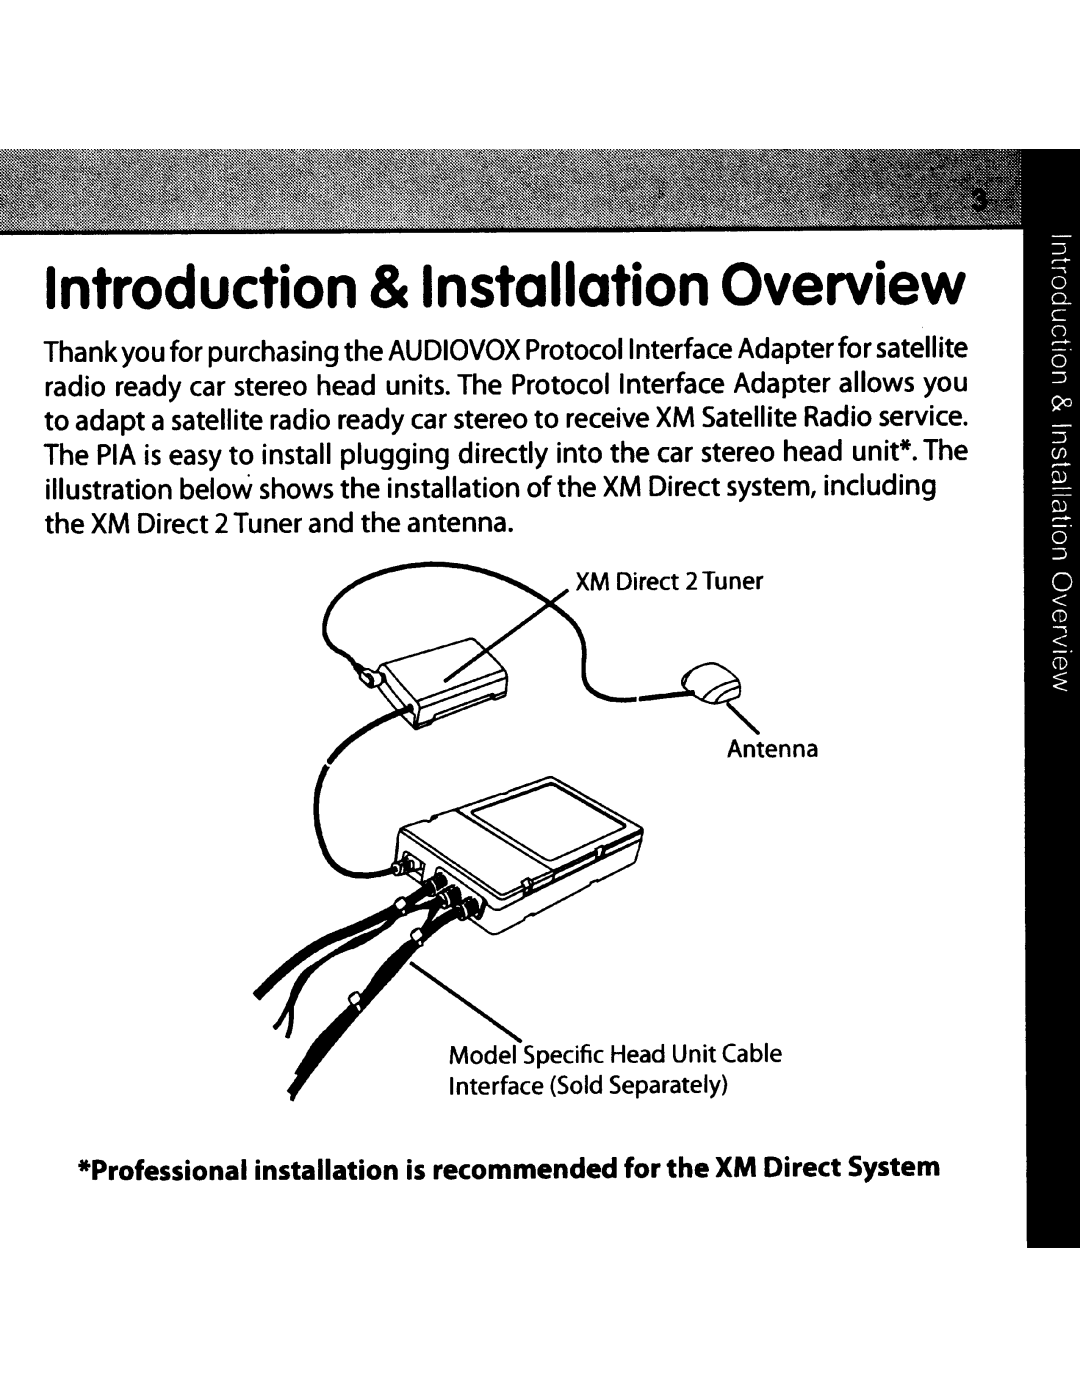 Audiovox CNP2000UCA manual Introduction &Installation Overview 